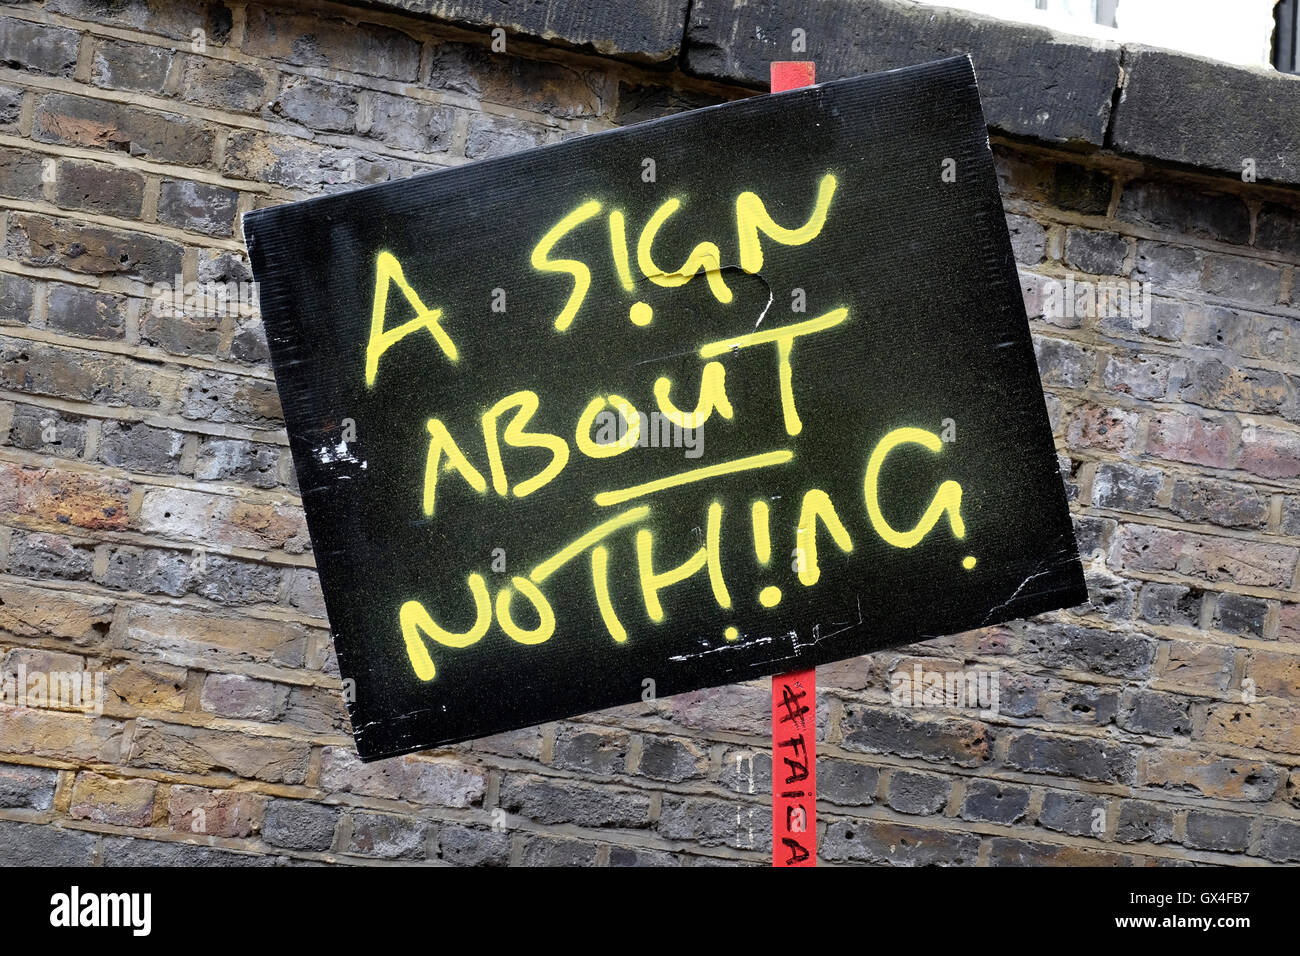 A sign reading “a sign about nothing” Stock Photo